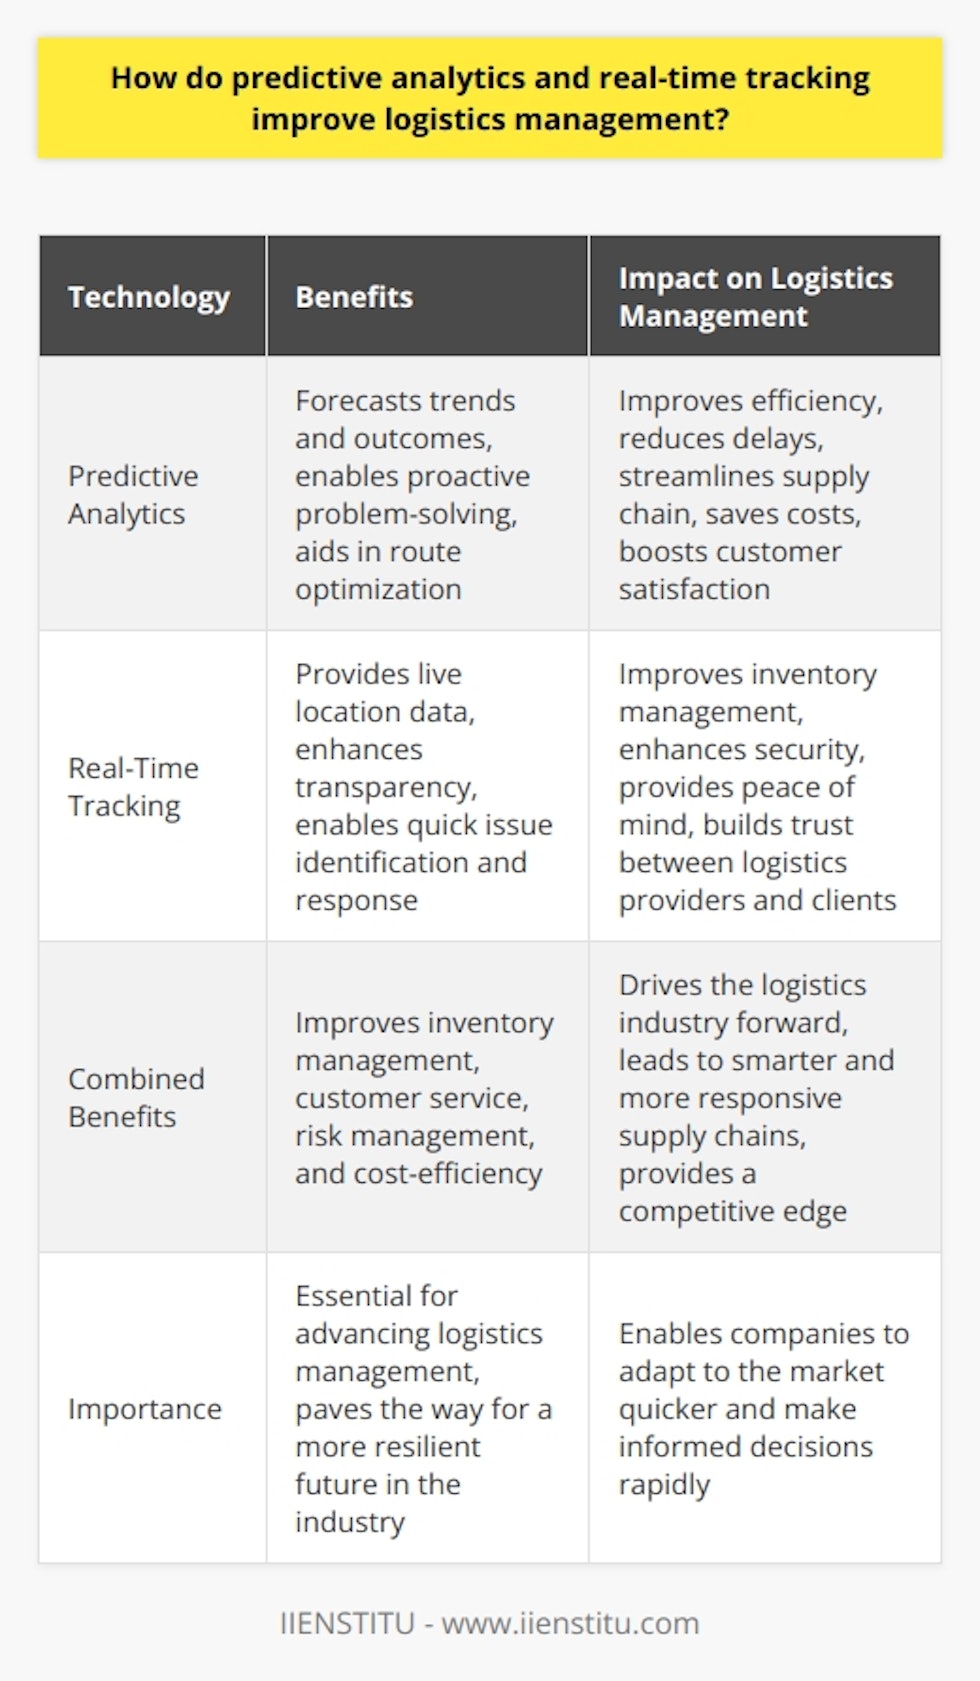 Predictive Analytics in Logistics Logistics management thrives on data.  Predictive analytics  turns this data into insights. We can forecast trends and outcomes. These forecasts are far from random guesses. They use historical and real-time data. Algorithms and machine learning drive these predictions.  Efficiency  skyrockets with such advanced notice. Companies can prepare for demand surges. They avoid overstocking during lulls. This balance saves money. It also boosts customer satisfaction. Predictive analytics can foresee disruptions. It enables proactive problem-solving. This means reduced delays. It leads to a streamlined supply chain.  Predictive analytics also aids in route optimization. It considers weather and traffic patterns. Efficient routes save time and fuel. This not only cuts costs. It also reduces environmental impact.  Real-Time Tracking Real-time tracking  complements predictive analytics. It provides live location data. This transparency is vital. It builds trust between logistics providers and clients.  With real-time tracking, issues are easy to identify. Quick responses follow. This agility protects against serious setbacks. Inventory levels become easier to manage. Shipments are less likely to get lost. This enhances security. It provides peace of mind. Combined Benefits Predictive analytics and real-time tracking merge seamlessly. Together, they form a powerful logistics management tool. -  Inventory management  improves. Surpluses and shortages fall. -  Customer service  gets better. Predictions offer accurate delivery times. -  Risk management  is stronger. Foresight and live tracking avoid disruptions. -  Cost-efficiency  rises. Fuel and warehousing costs drop significantly.    Both technologies drive the logistics industry forward. They lead to smarter, more responsive supply chains. They provide a competitive edge. Companies can adapt to the market quicker. They can make informed decisions rapidly.  Predictive analytics and real-time tracking are no longer optional. They are essential for advancing logistics management. They pave the way for a more resilient future in this industry.